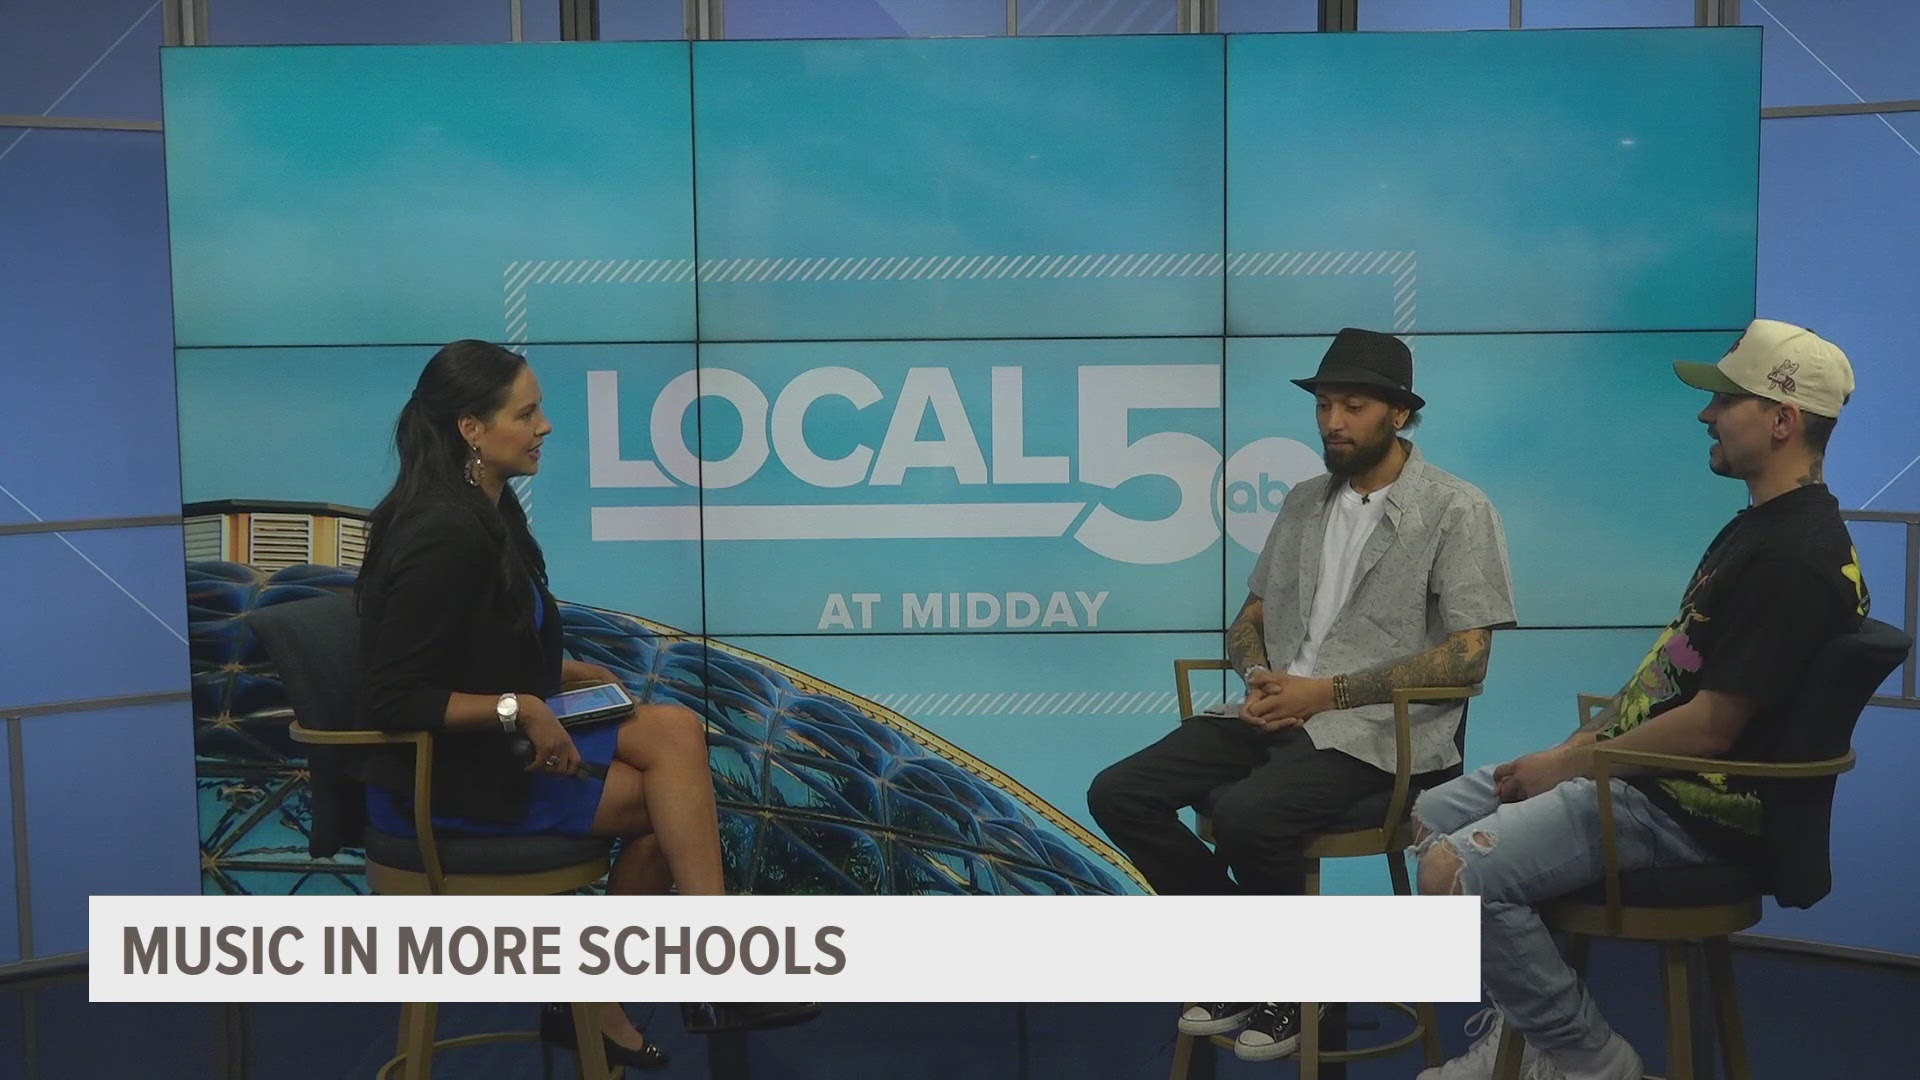 Anthony Moldanado and Dom Russell join Local 5 at Midday to discuss their work in schools.